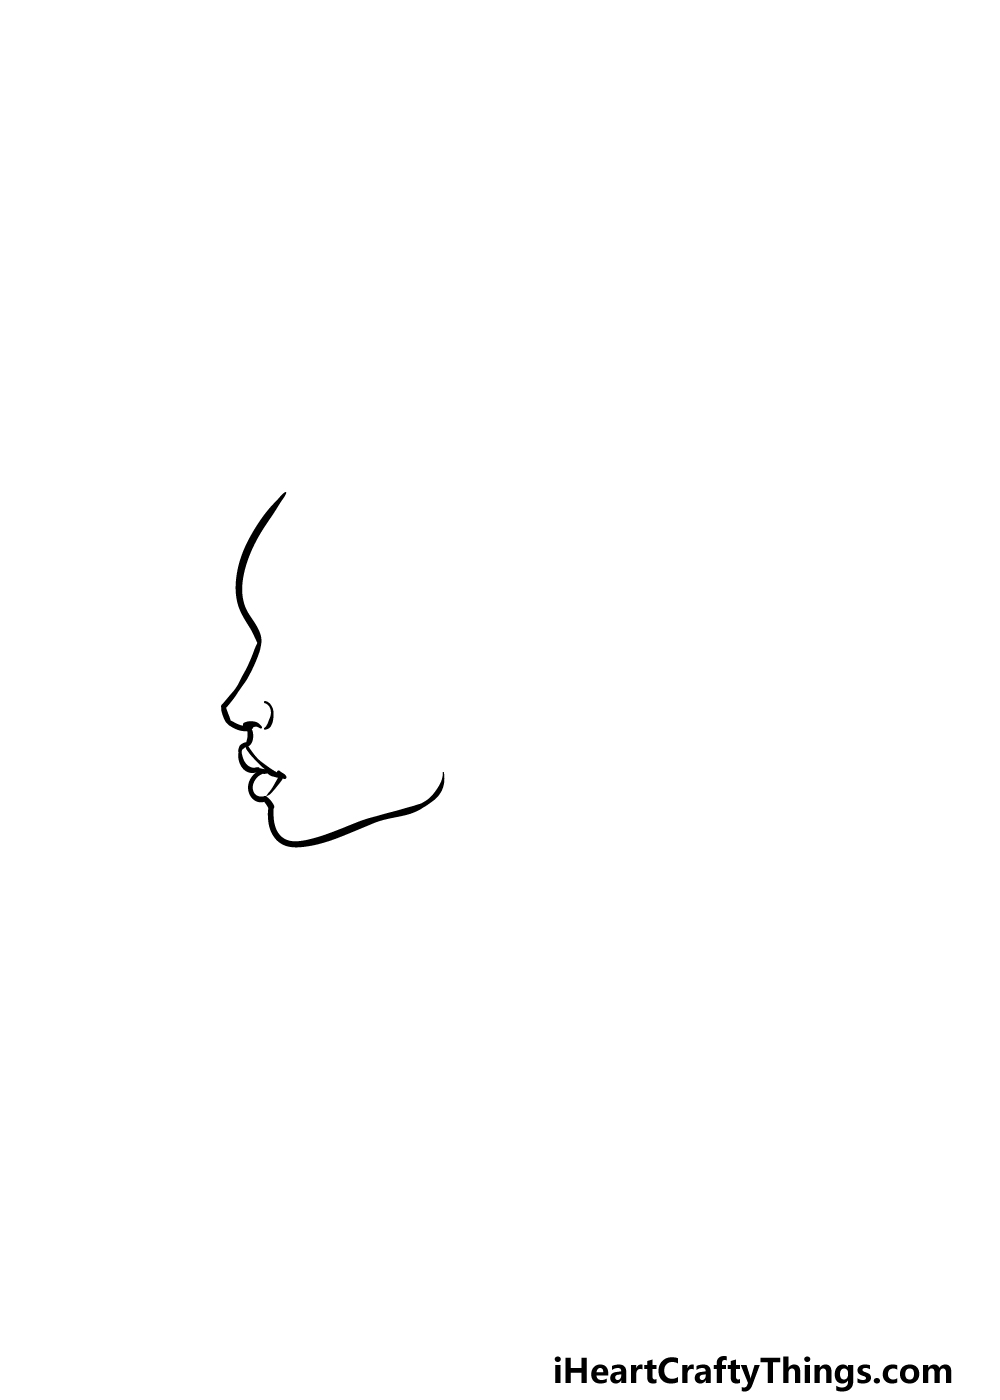 how to draw a Woman’s Side Profile step 1